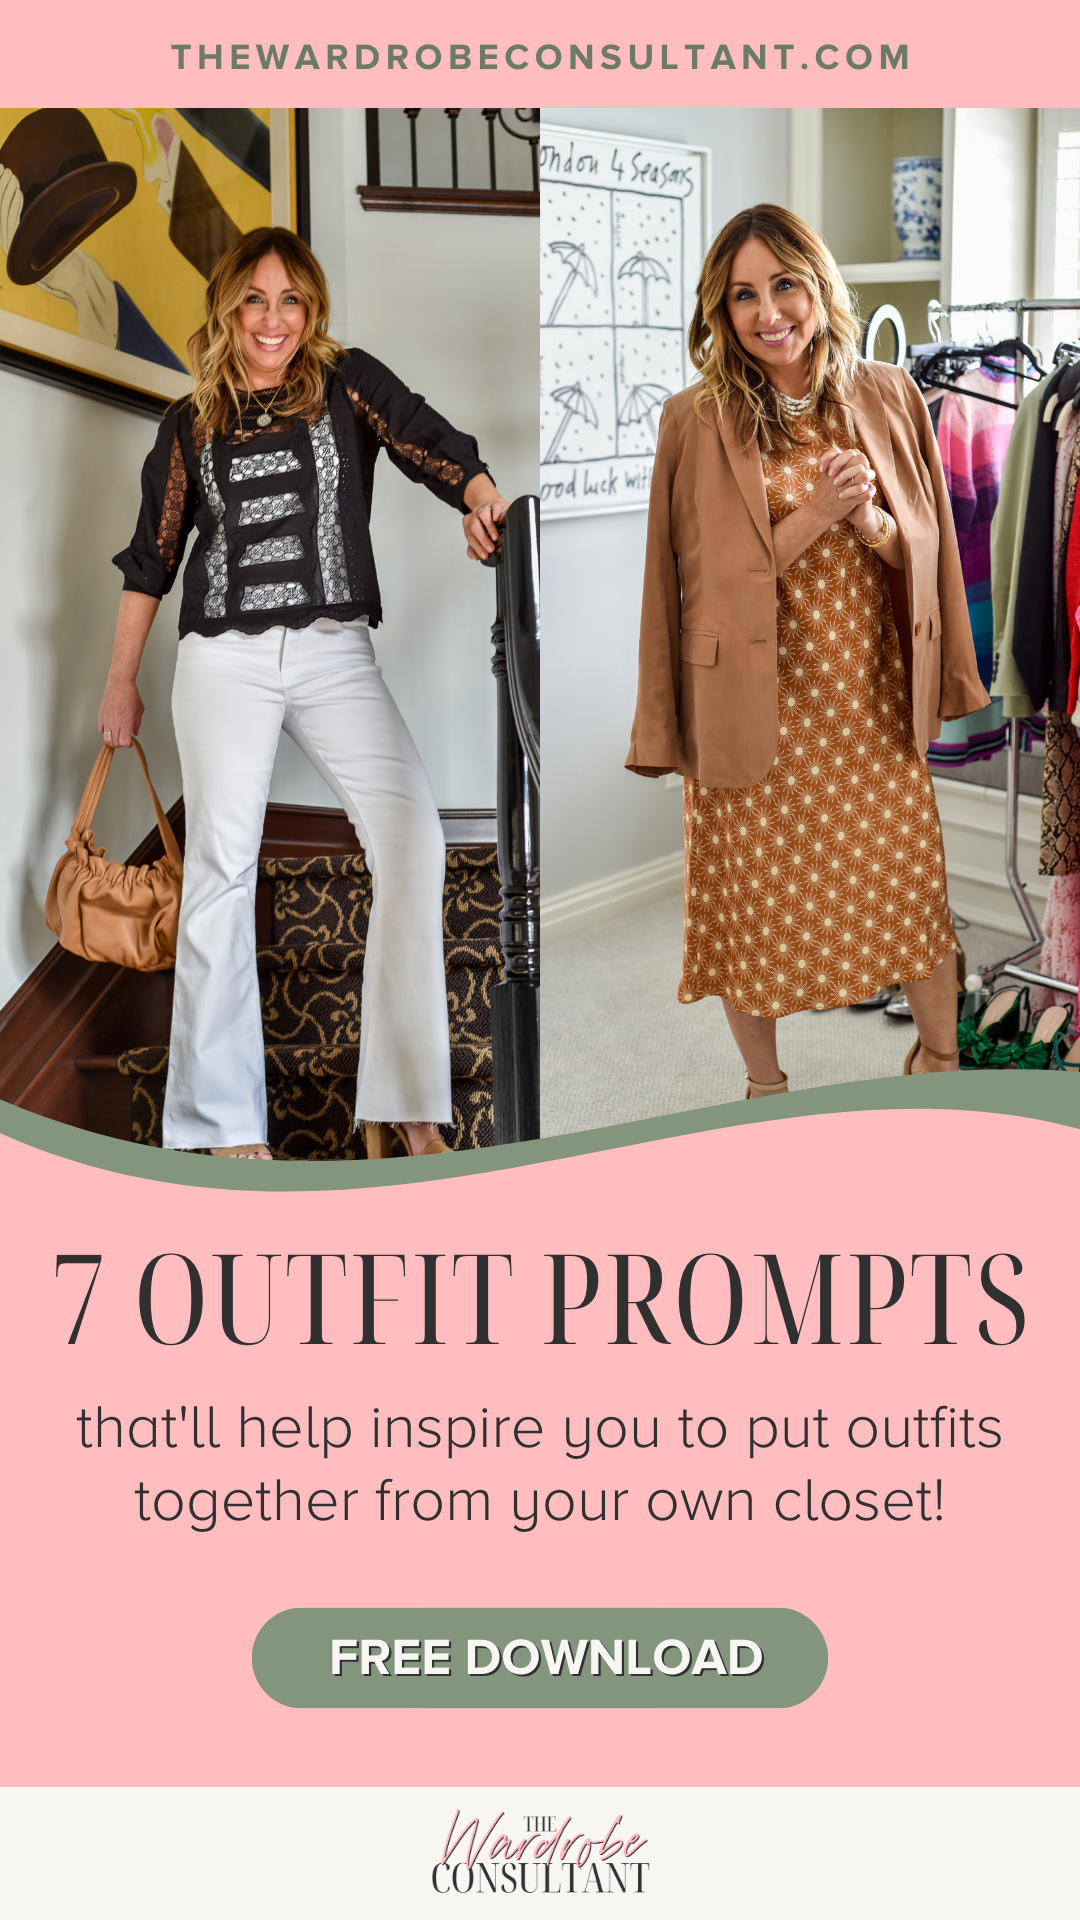 7 Outfit Prompts — The Wardrobe Consultant